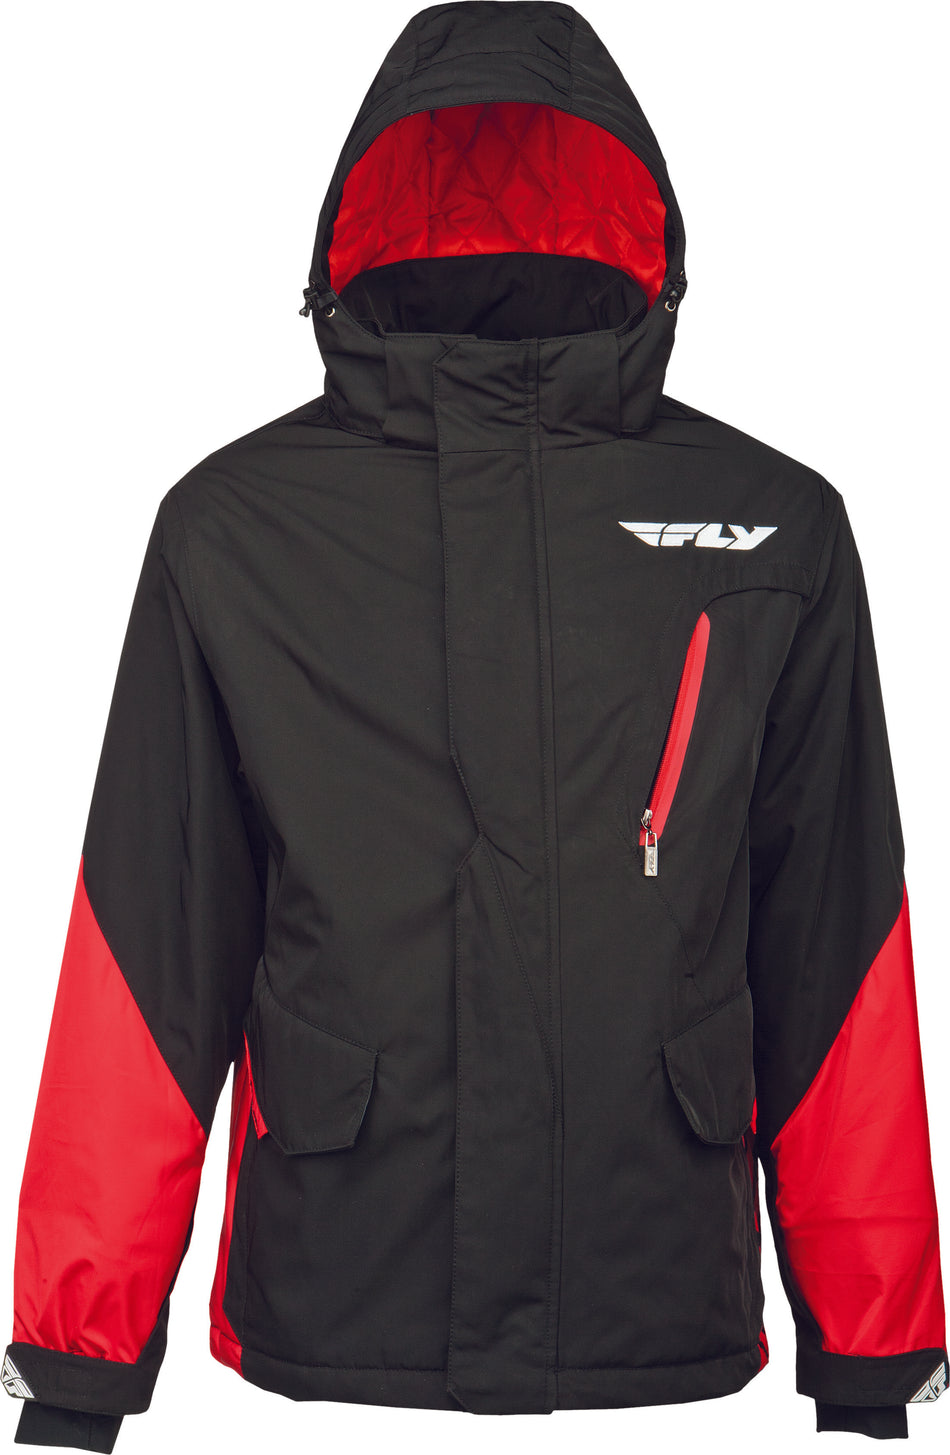 FLY RACING Factory Jacket Red/Black S 354-6162S